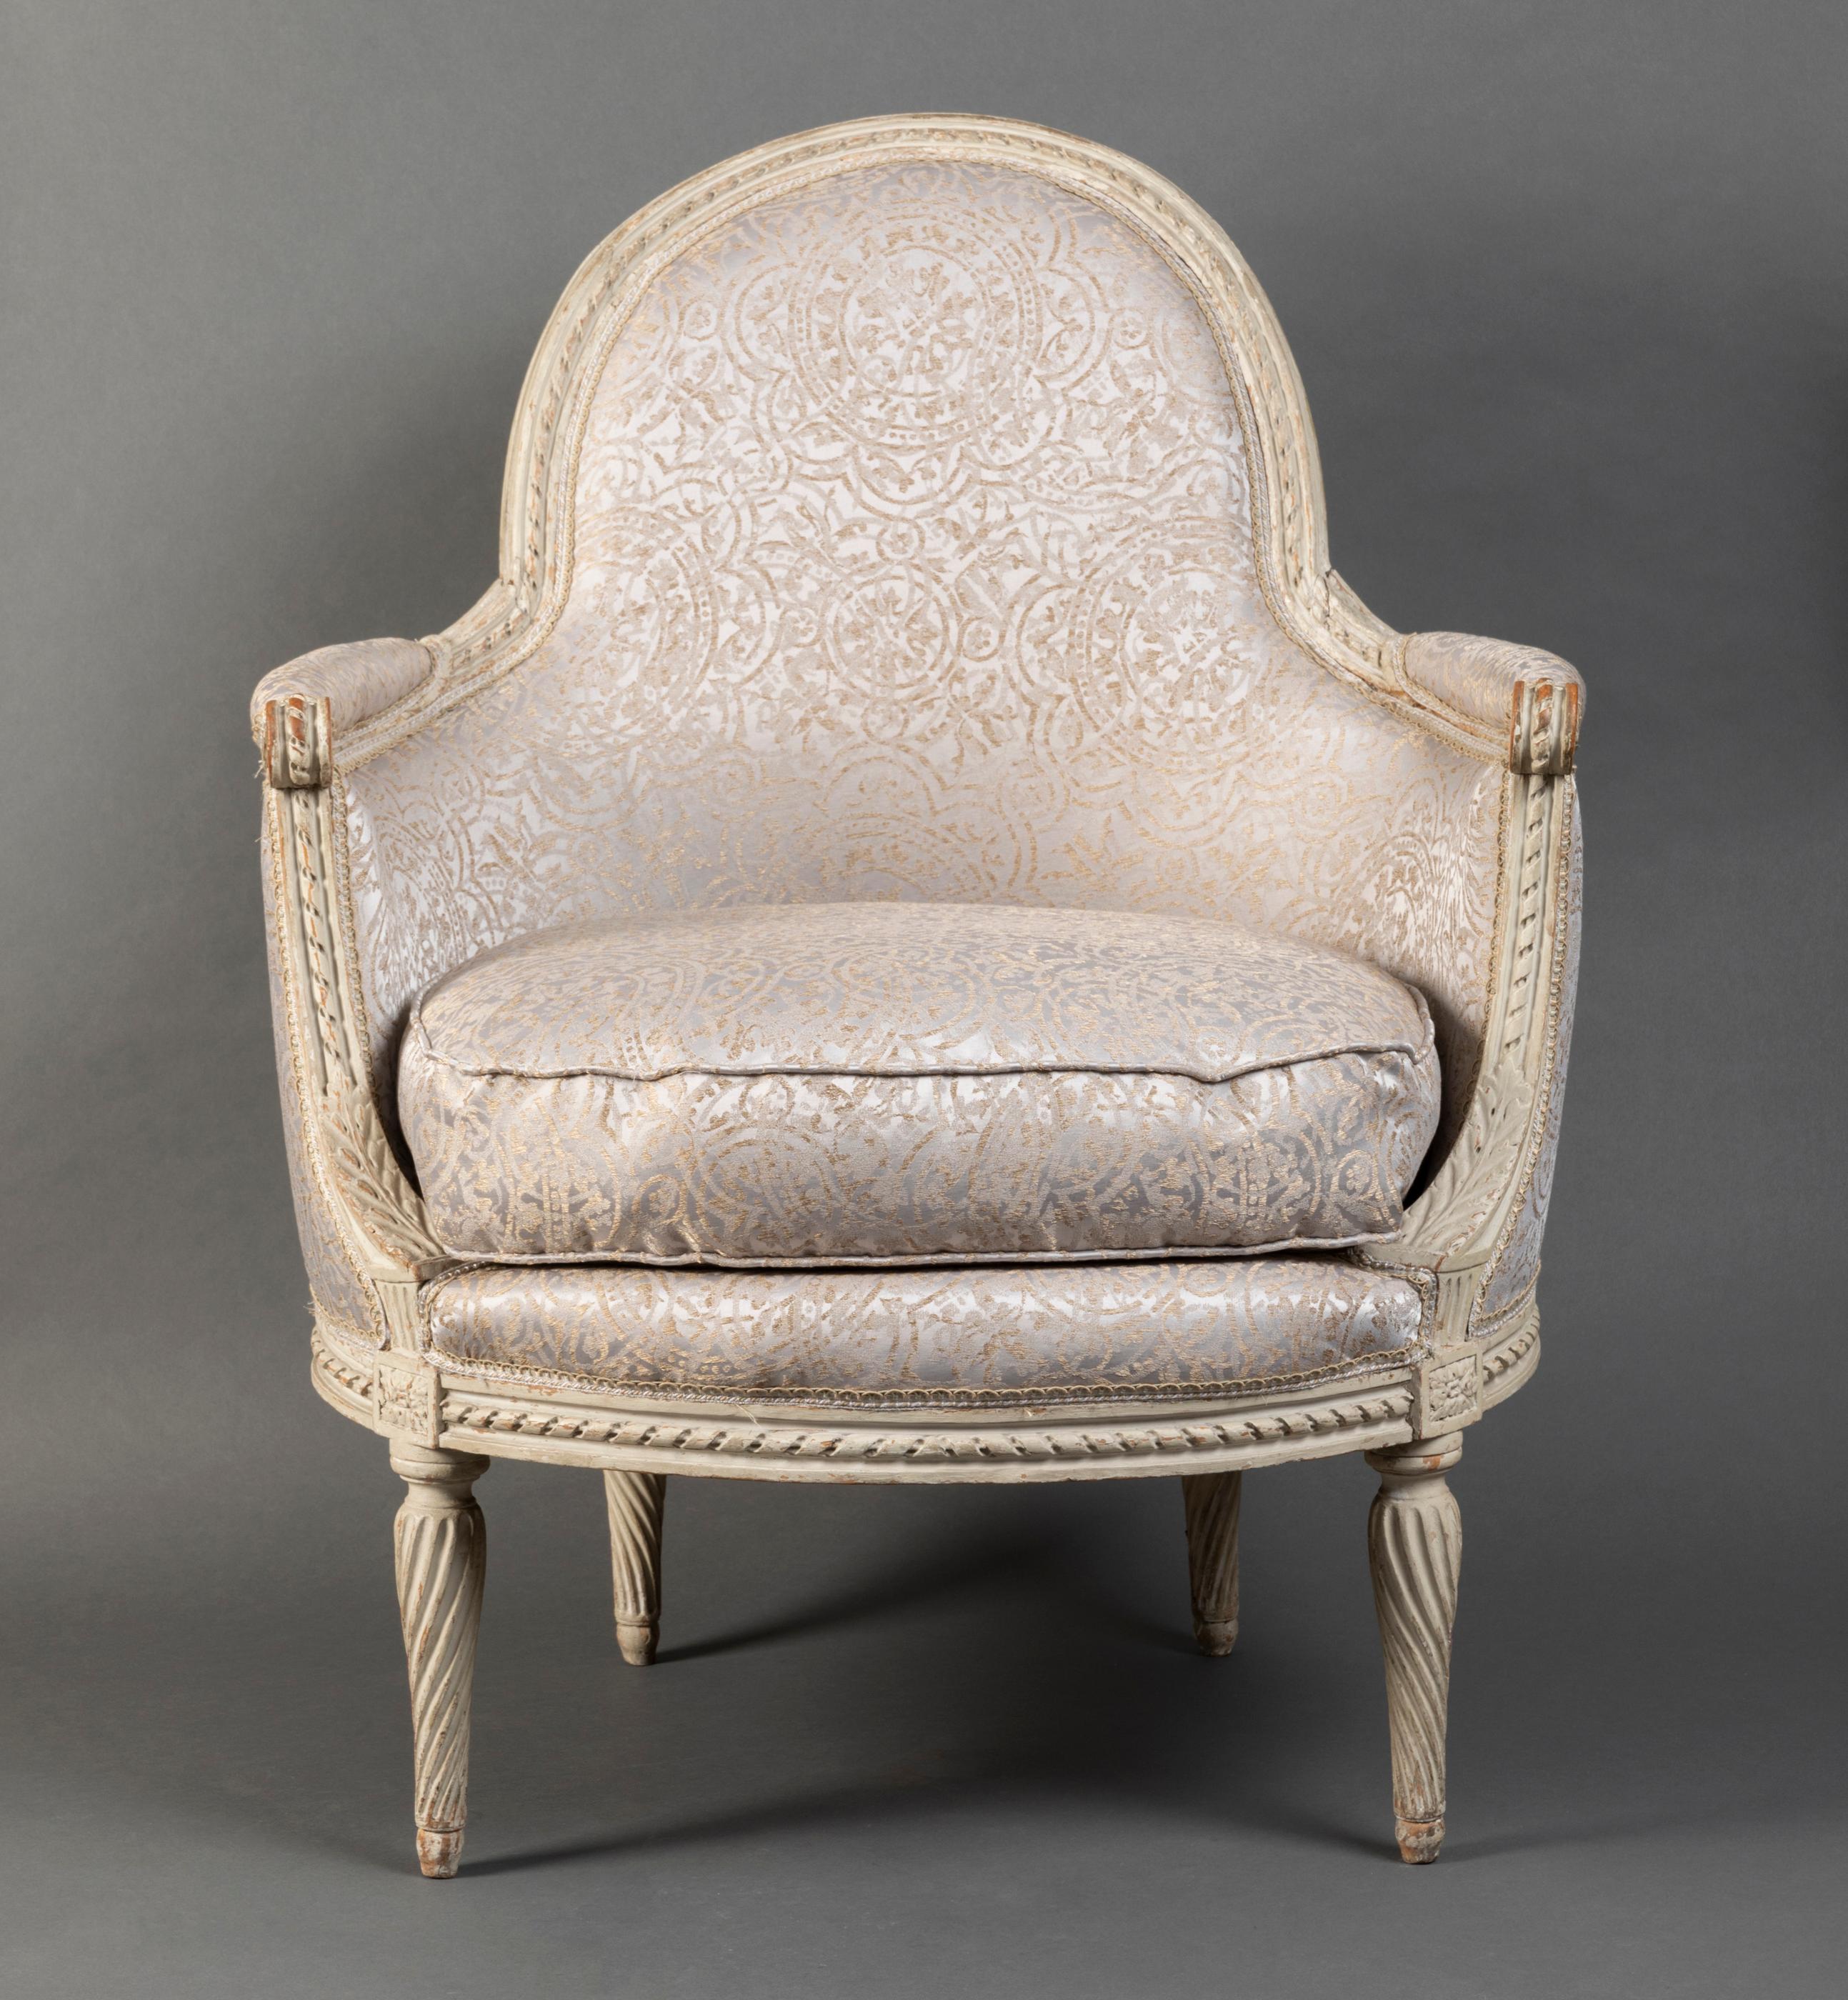 Beautiful pair of wing chairs in molded beech, richly carved and cream lacquered, decorated by banded moldings; enveloping armrest consoles with stylized acanthus leaves and rosettes; tapered legs with twisted grooves.
DELANOIS stamp on the two